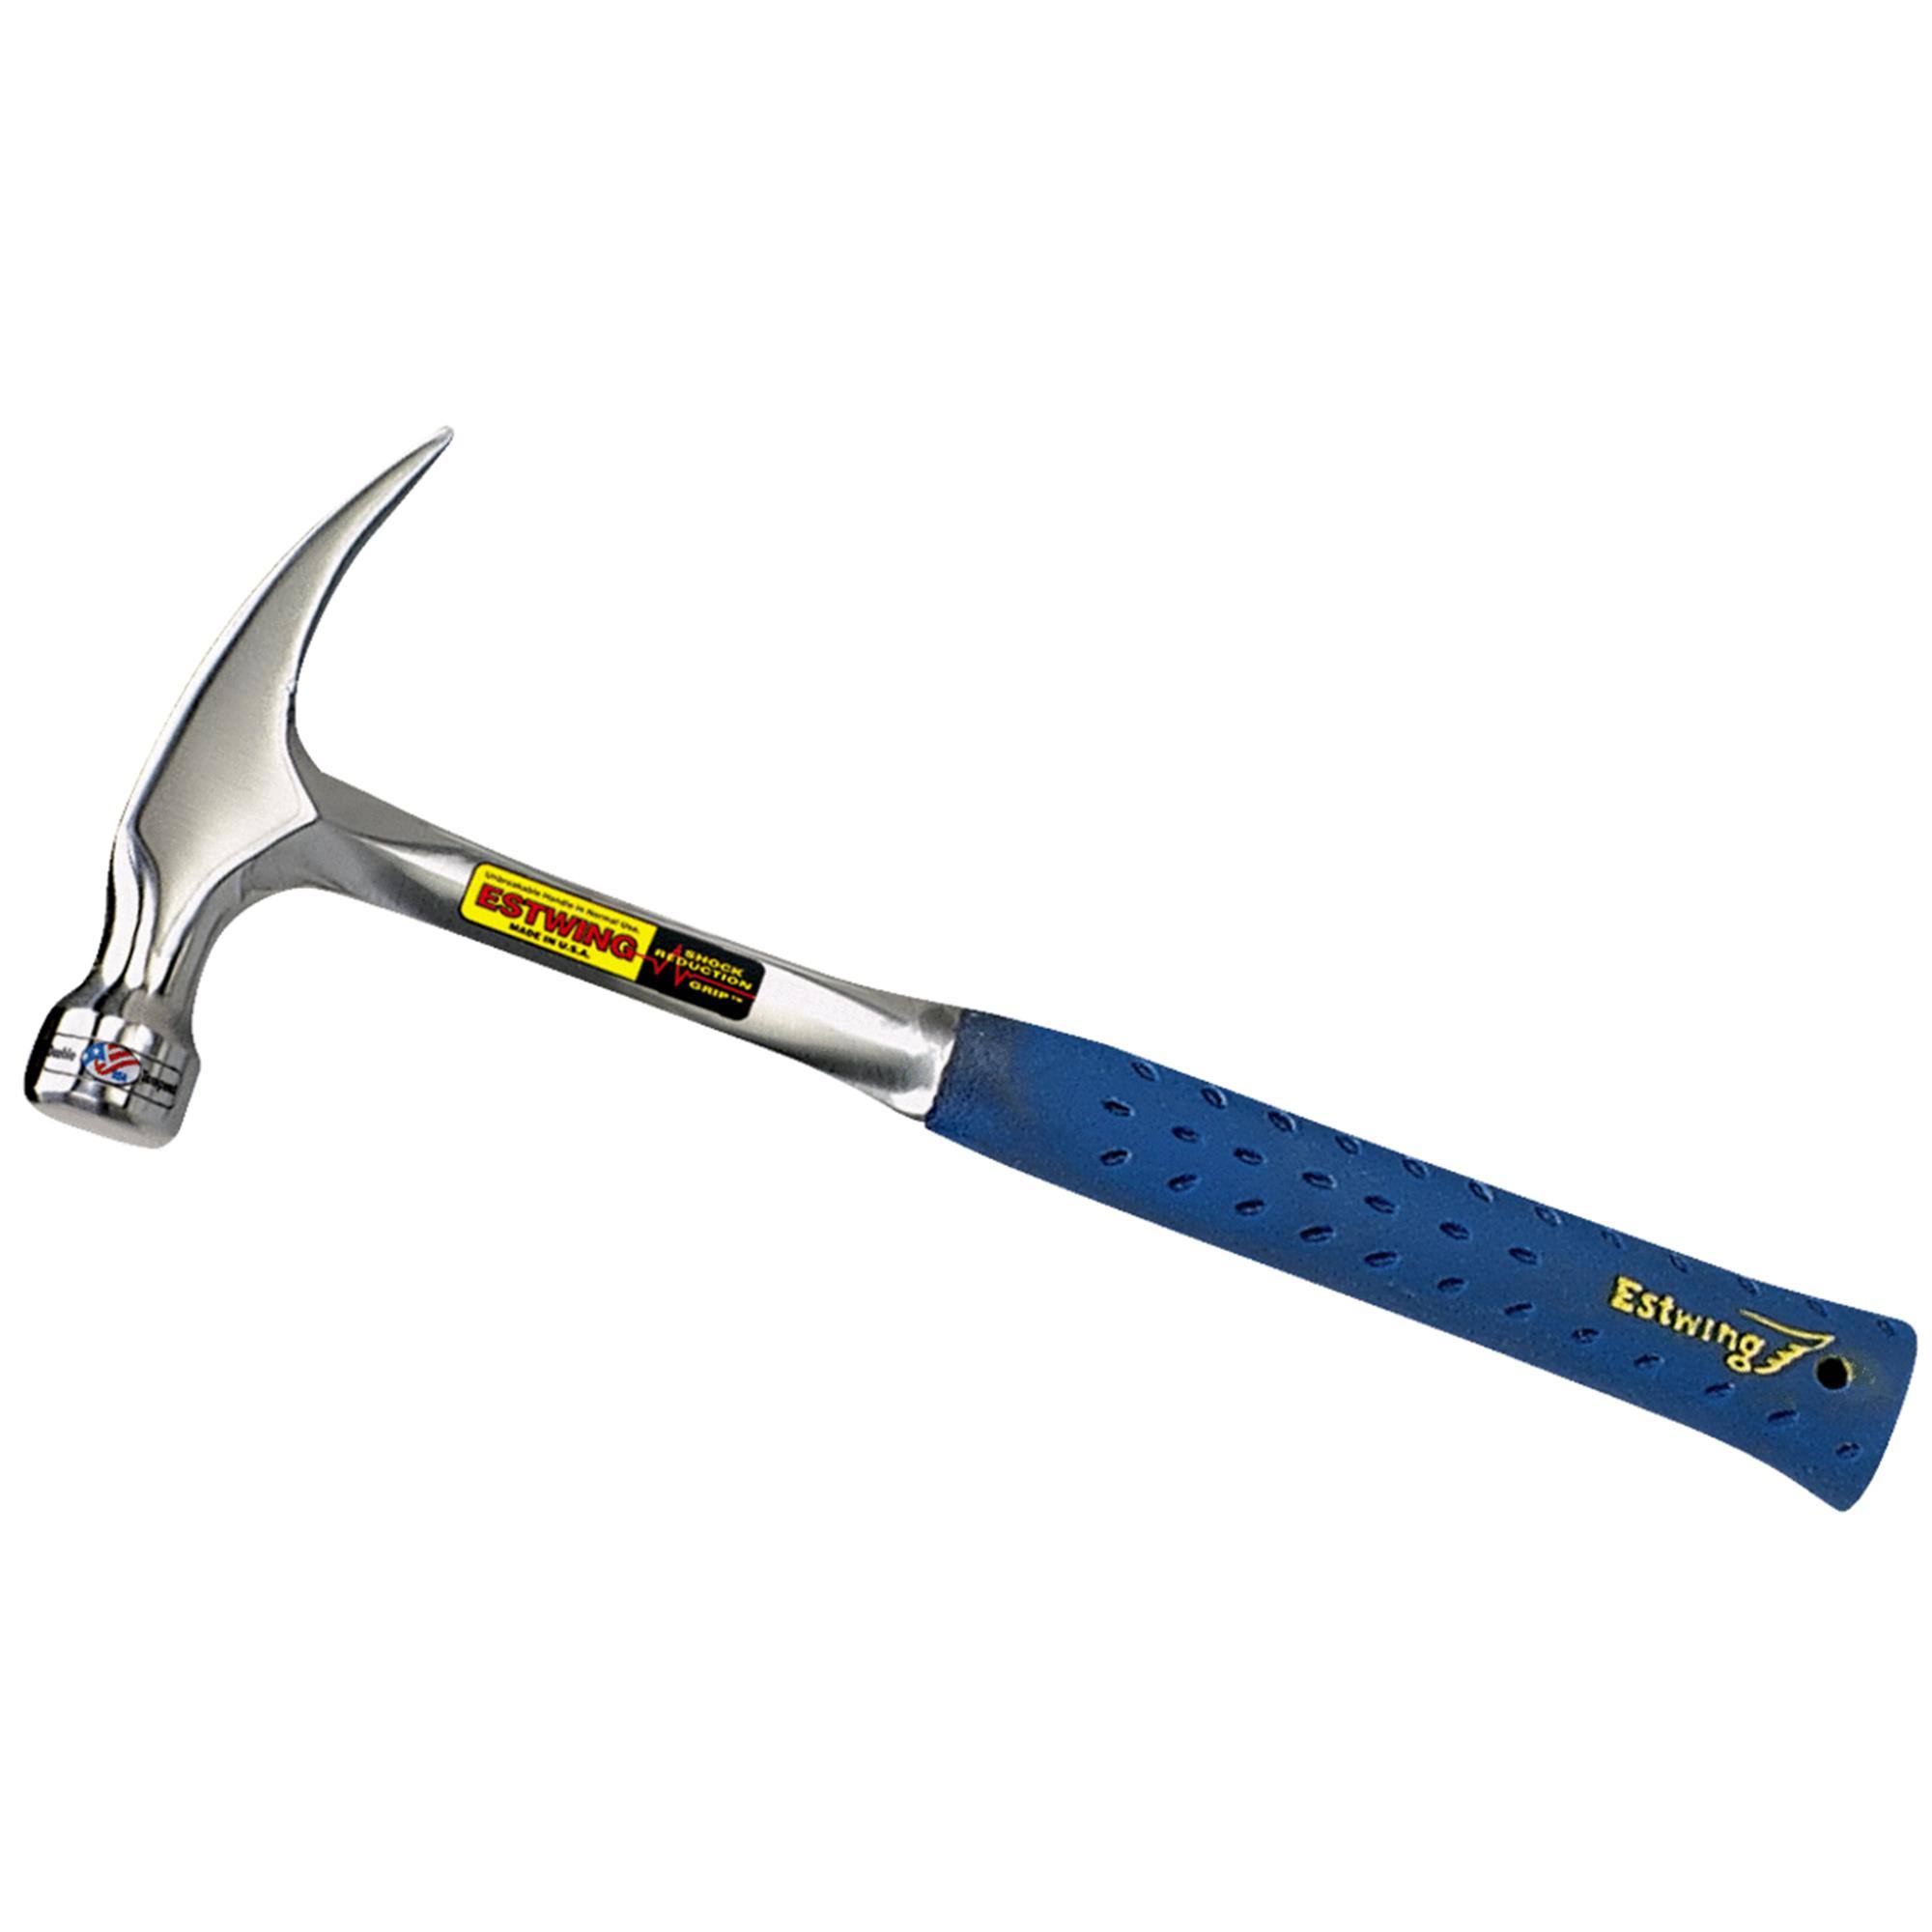 Estwing E3-20s Ripping Hammer With Metal Handle